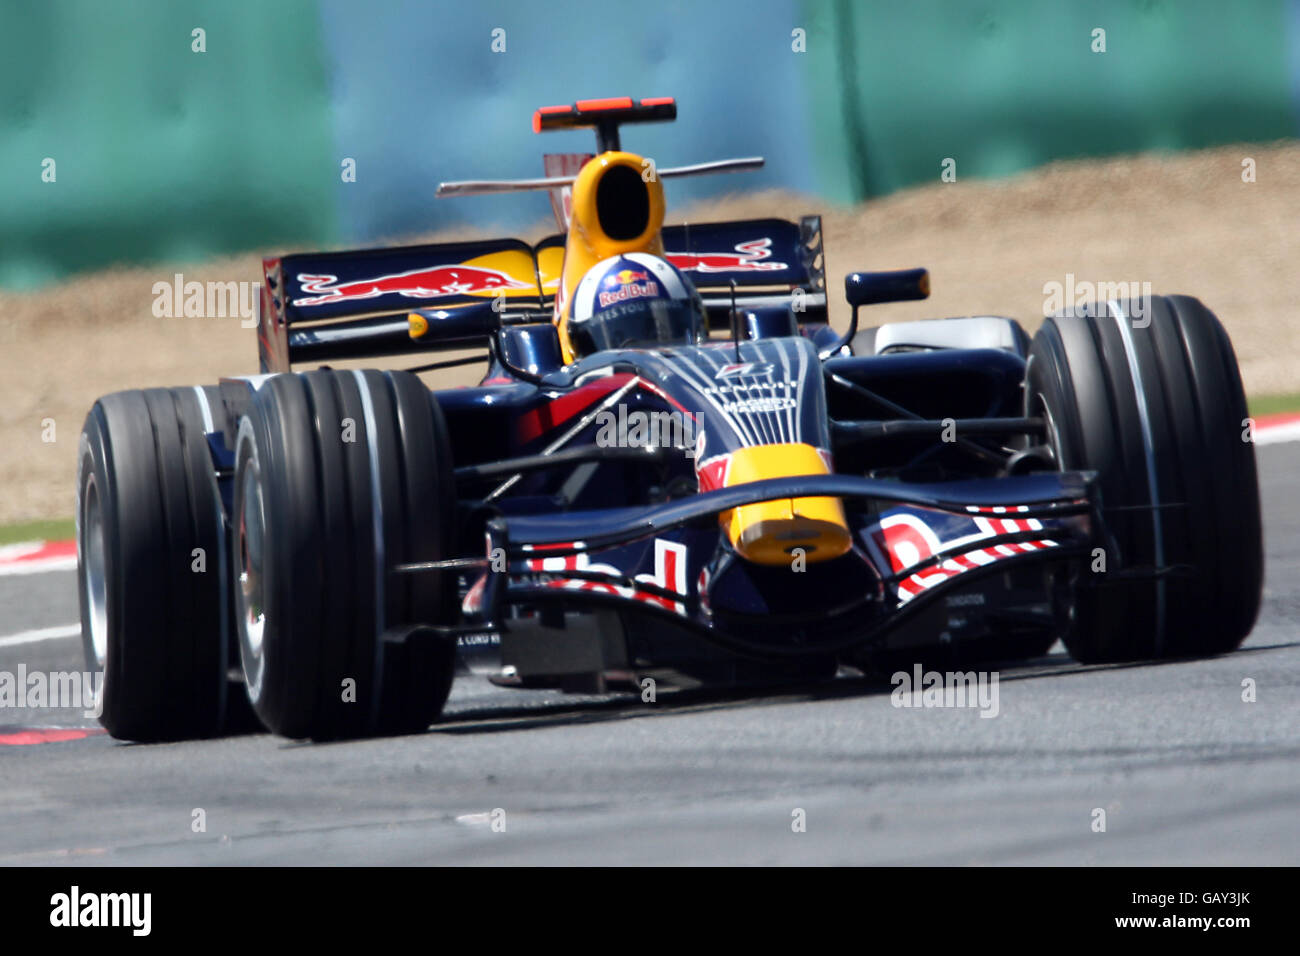 Formula One Motor Racing - French Grand Prix - Qualifying - Magny Cours. Red Bull Racing's David Coulthard during qualifying for the Grand Prix at Magny-Cours, Nevers, France. Stock Photo